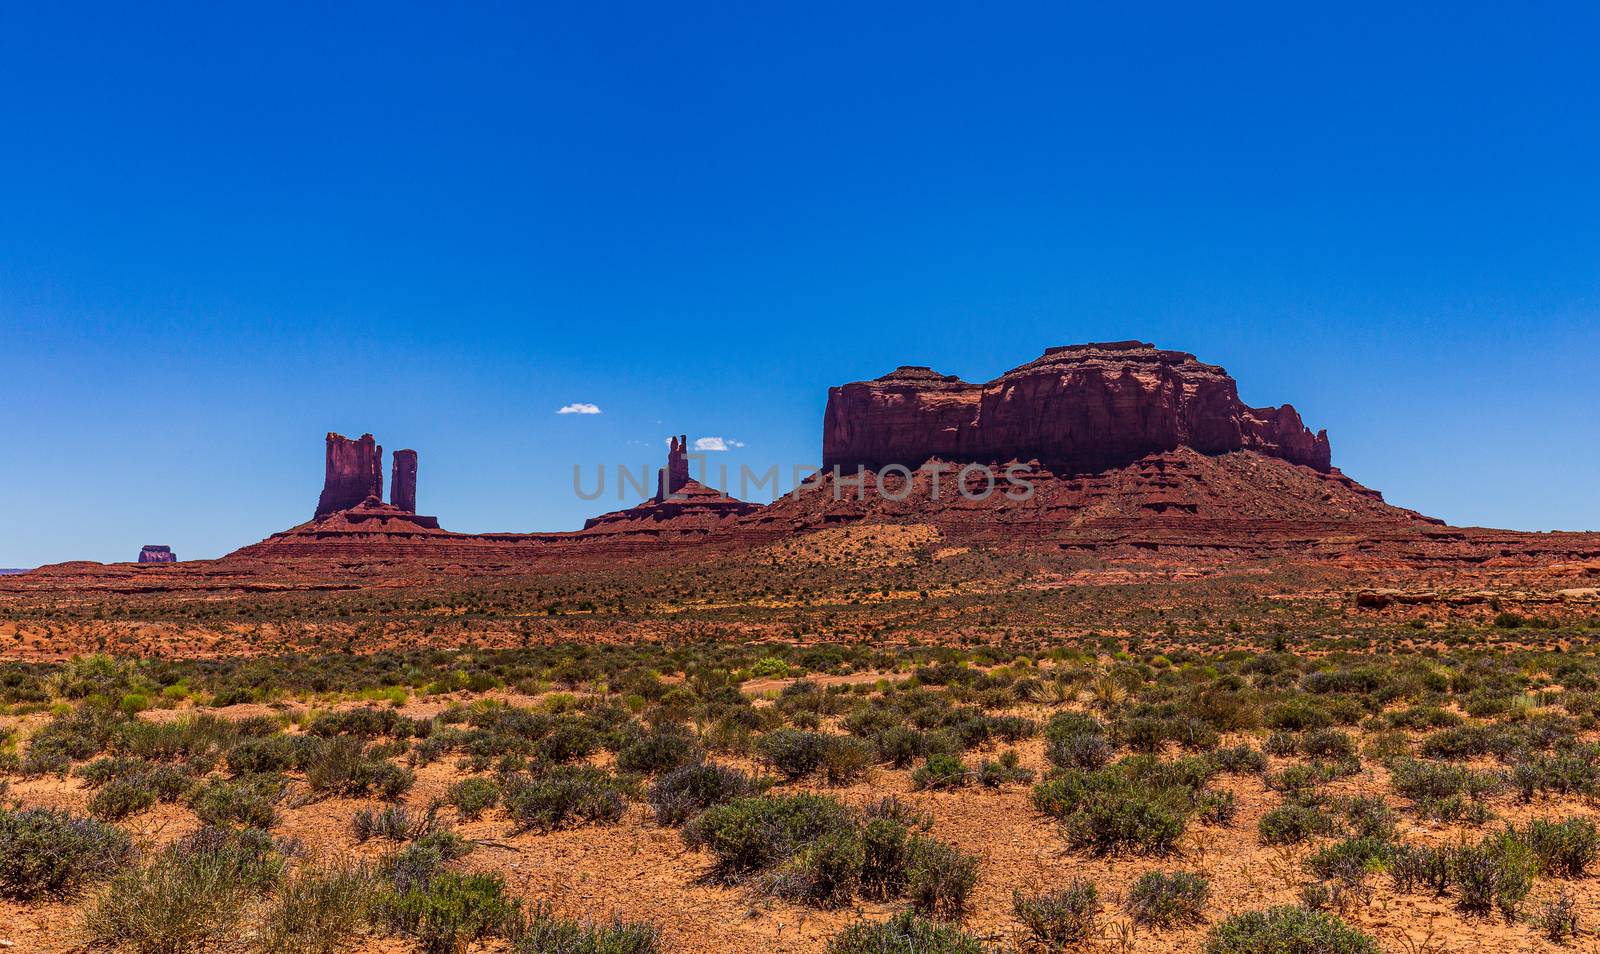 Panorama of Monument Valley Navajo Tribal Park by mkenwoo